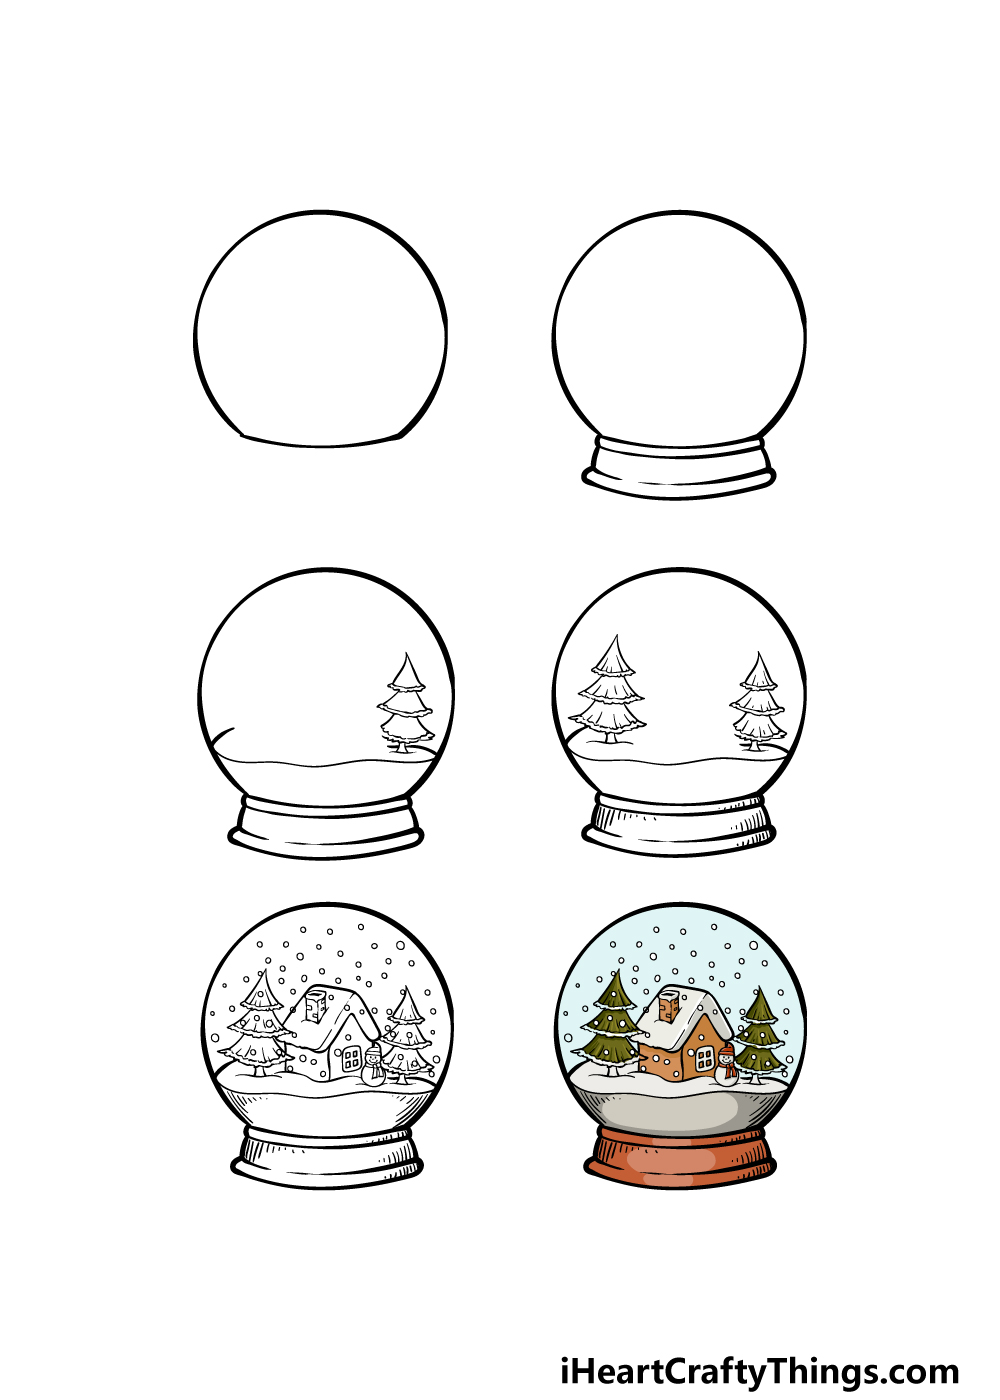 how to draw a Snow Globe in 6 steps